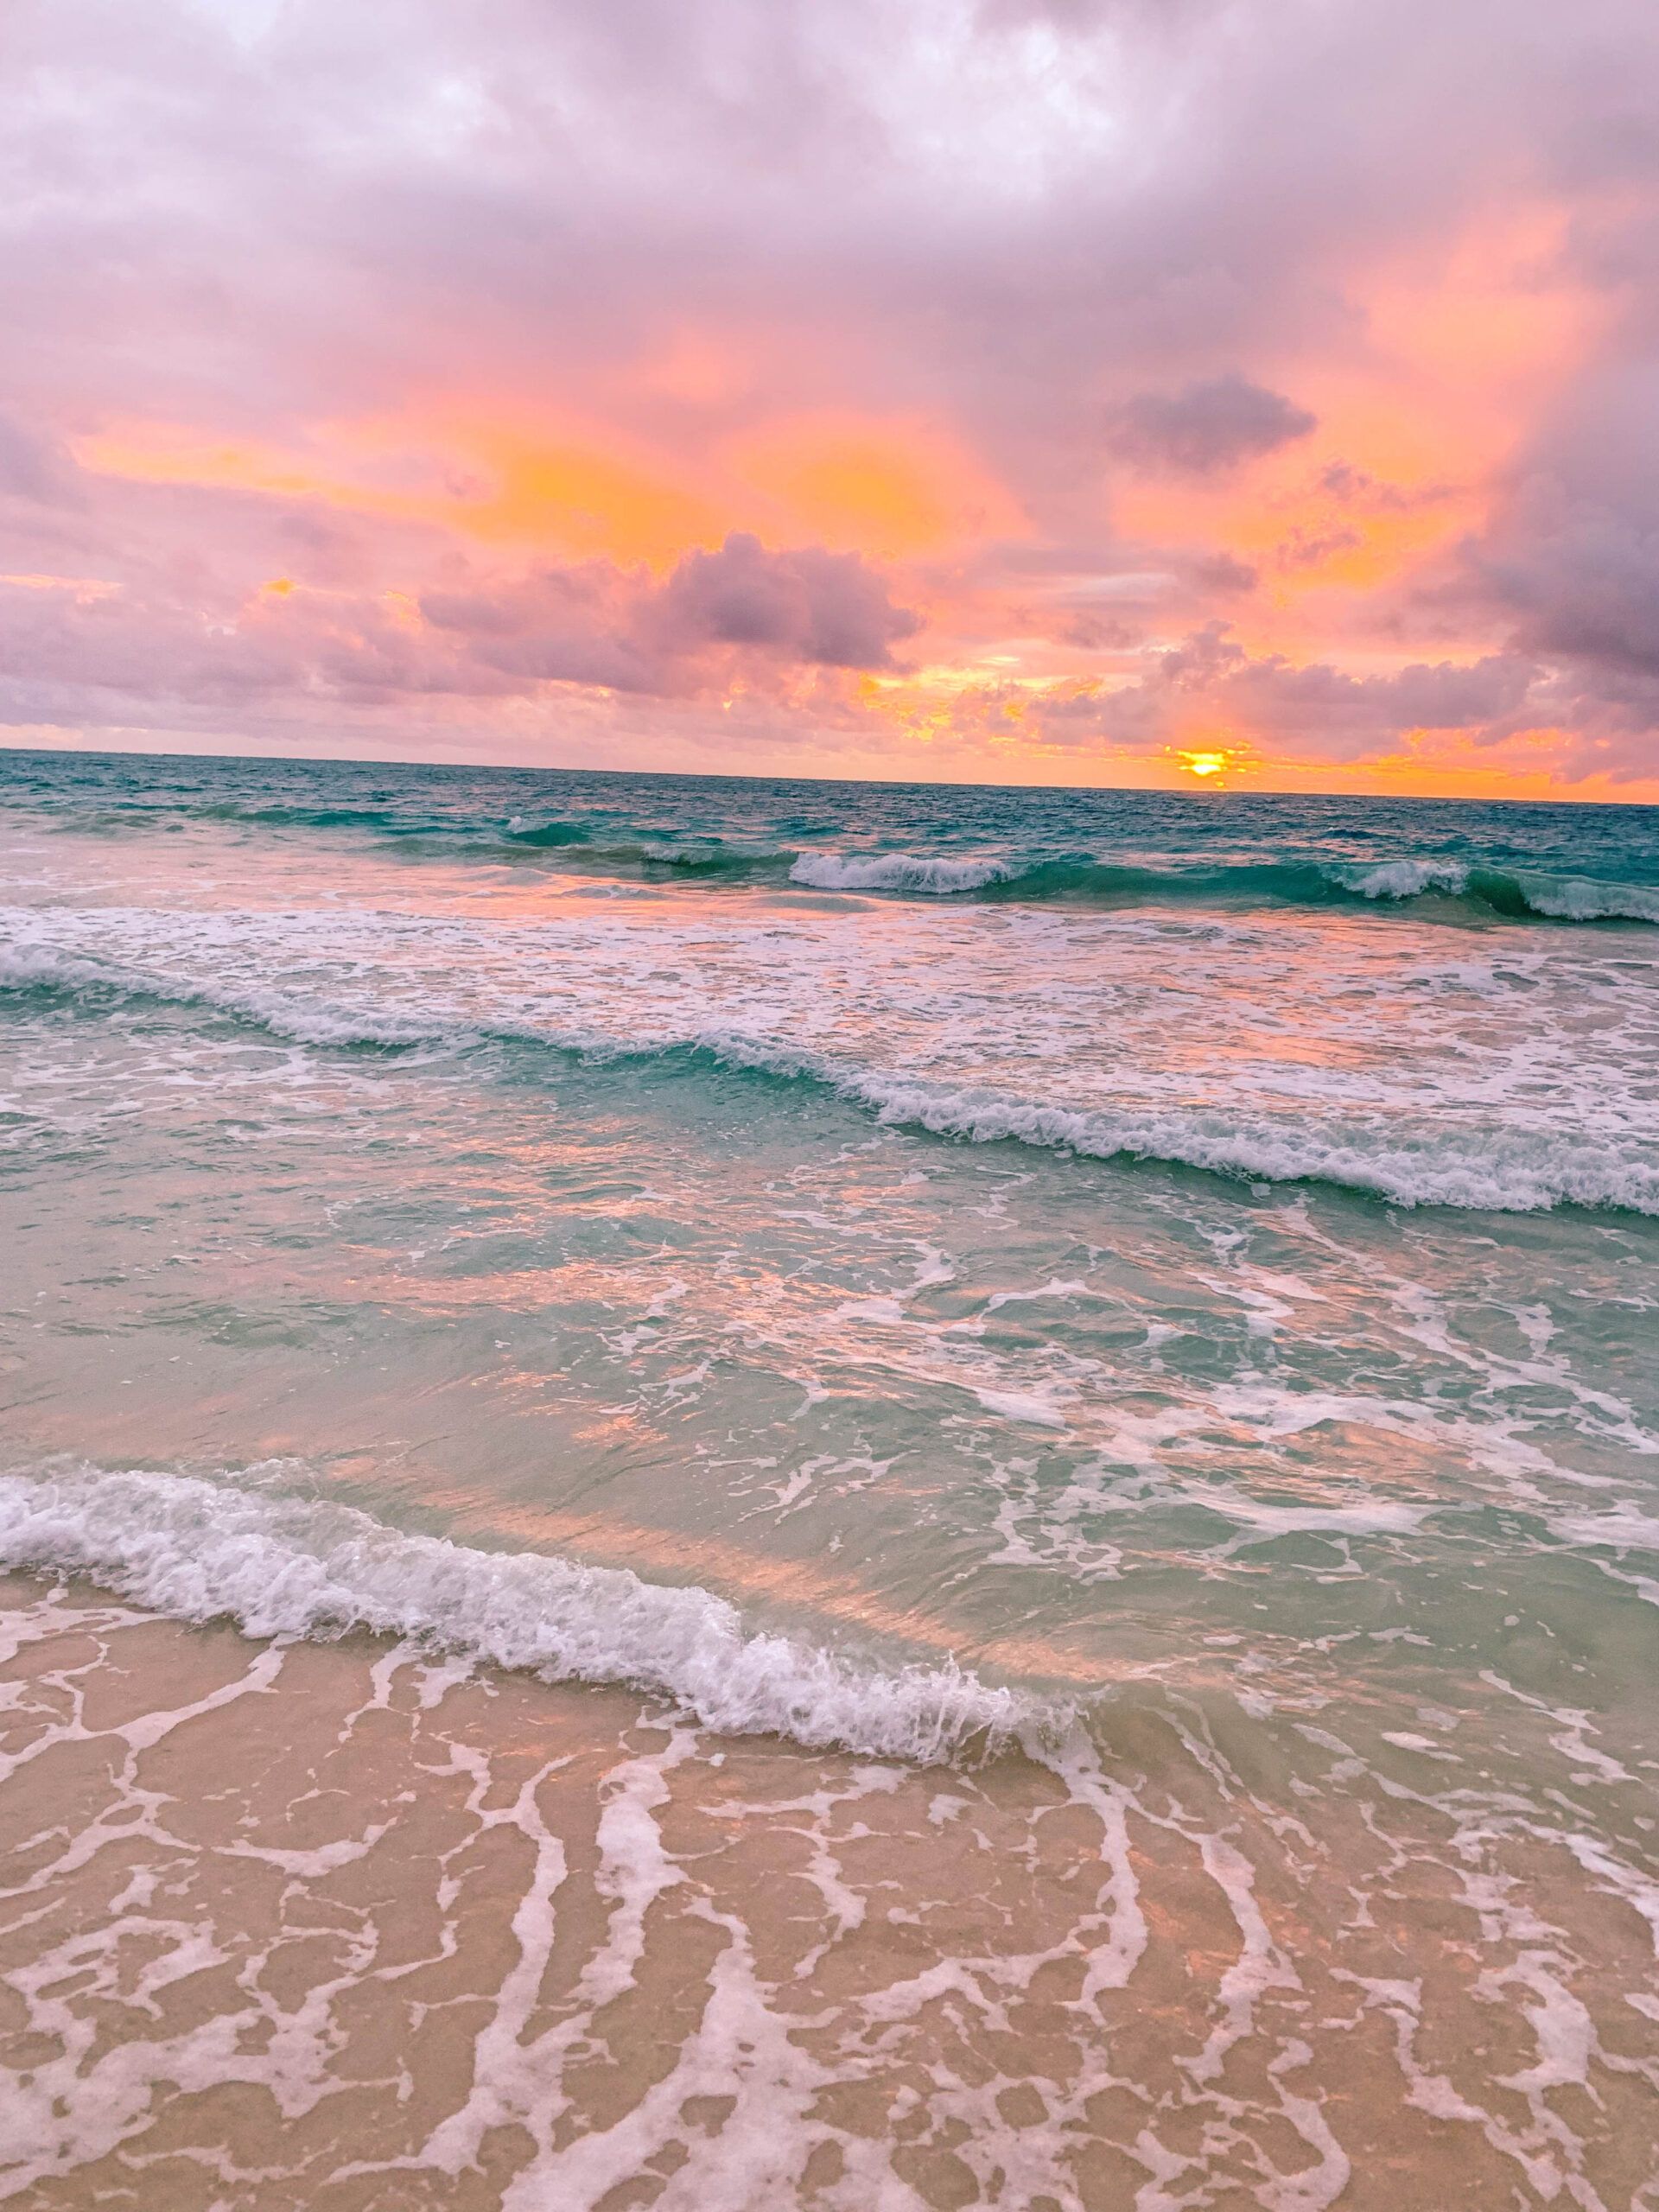 A photo of the ocean with a pink and orange sunset in the background. - Hawaii, sunrise